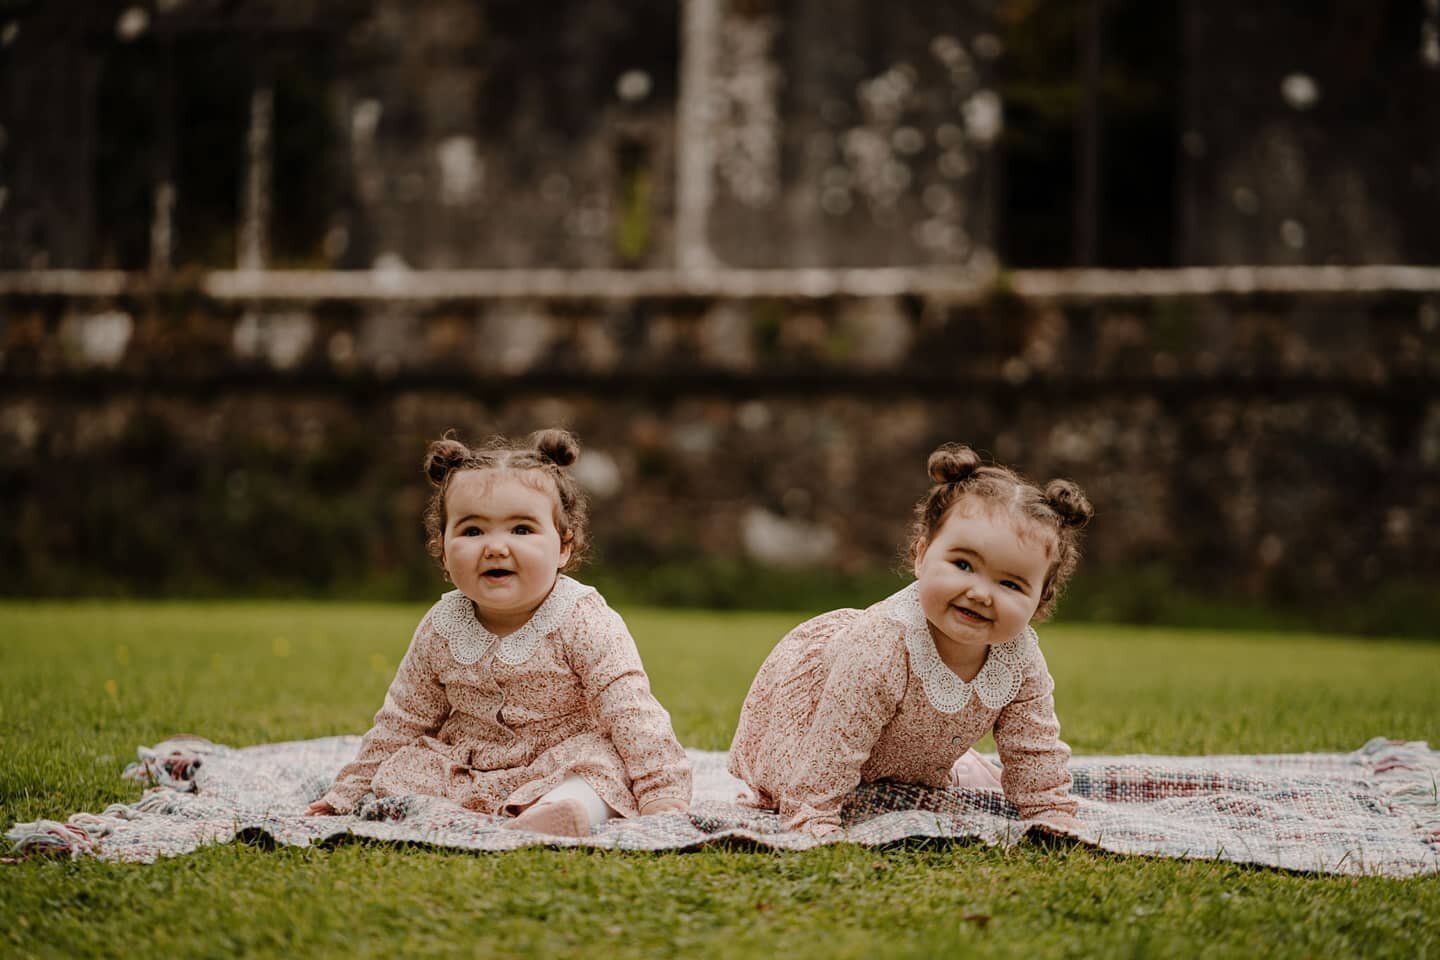 What a difference a year makes!
.
Evie and Skye turn 1 tomorrow and I was super honoured to be invited back to document their first birthdays
.
---&gt; to see just how teeny tiny cute and squishy they were at their snug session last year 😭😍
.
#twin